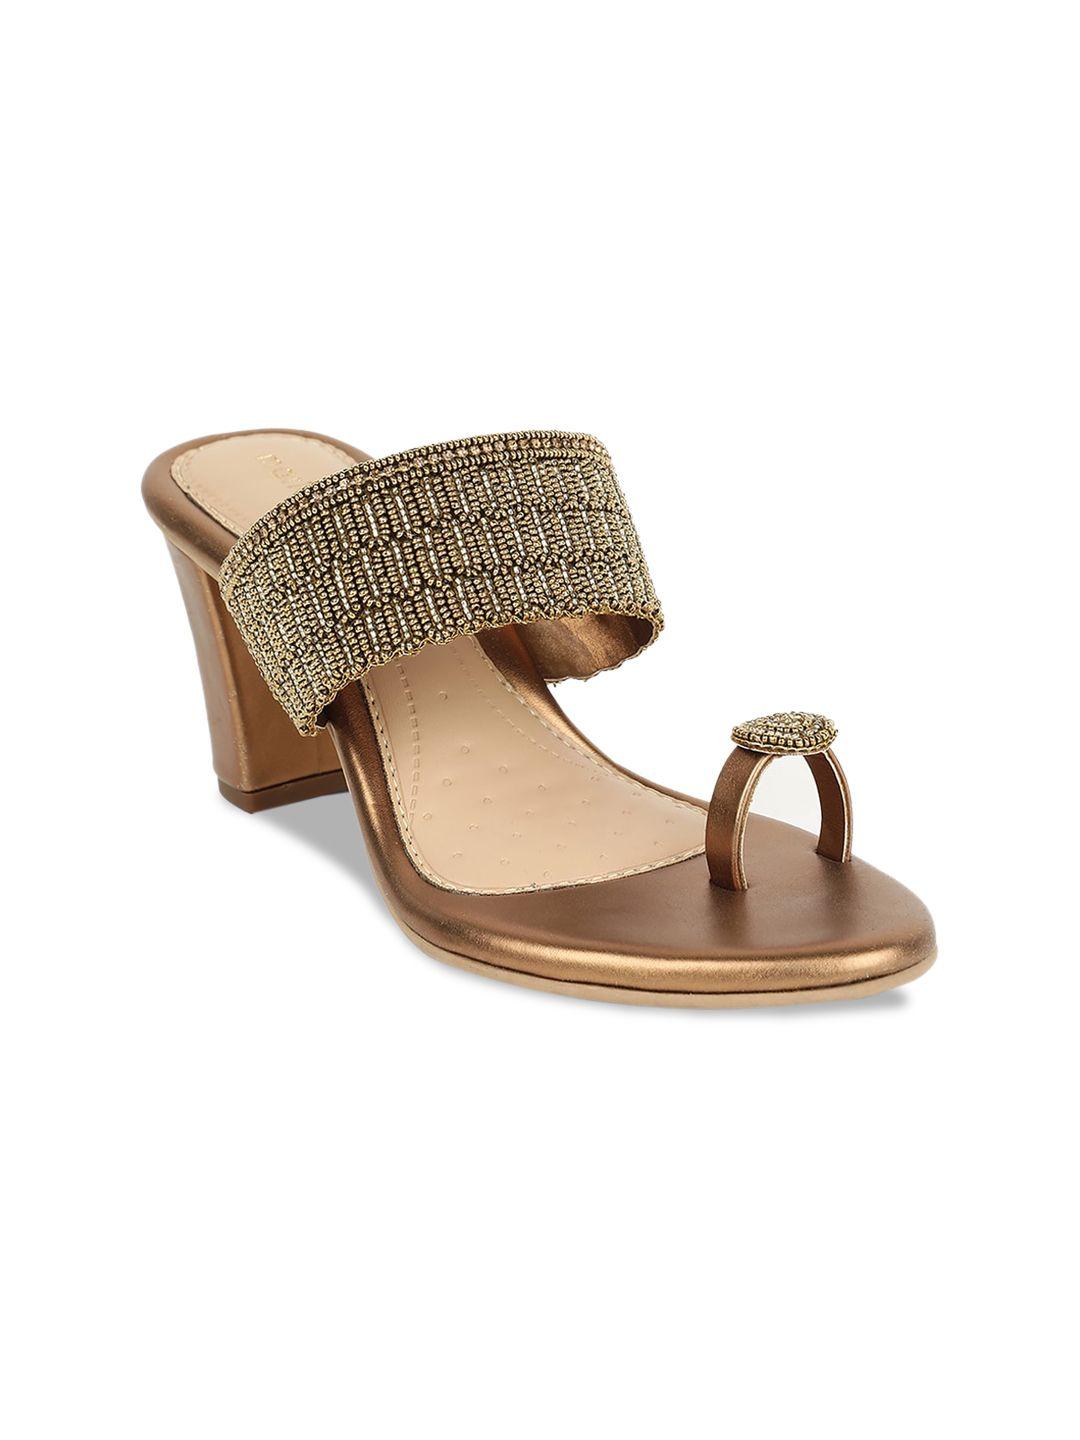 marie claire women gold-toned embellished sandals